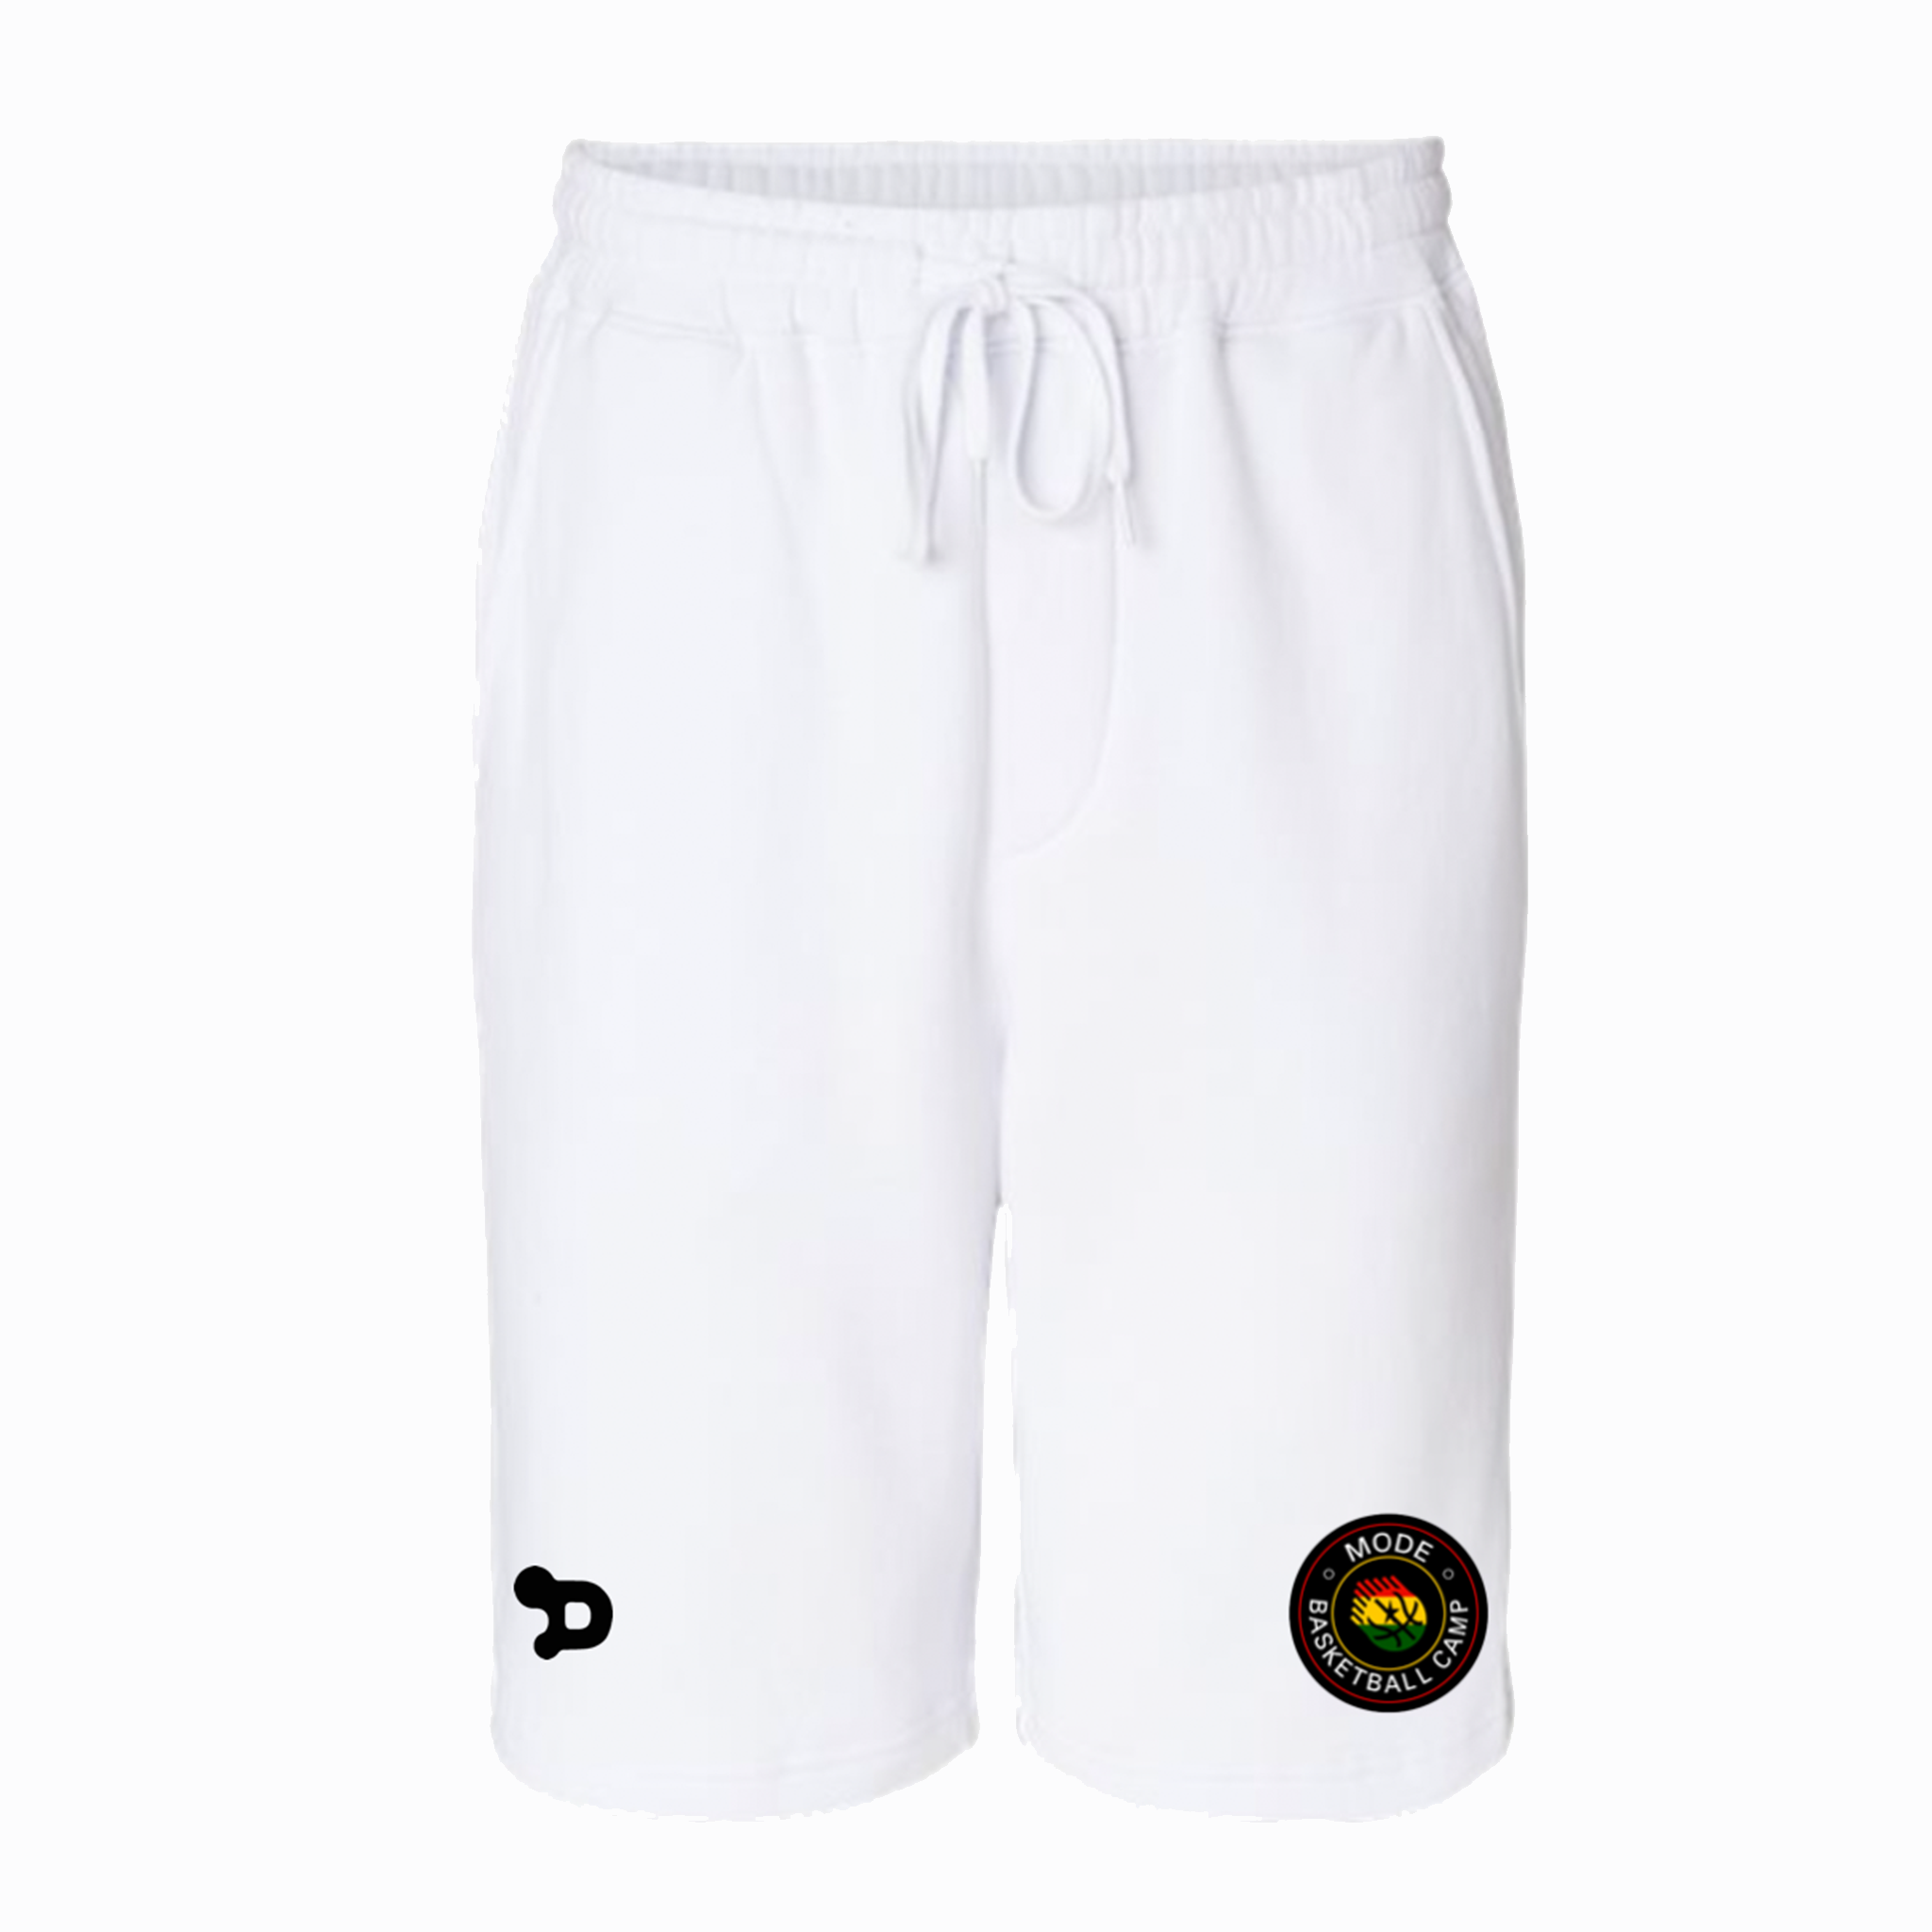 Mode_Basketball_Shorts.png__PID:e2984ac3-0cea-4f73-bfb0-2fe2ee1773ce